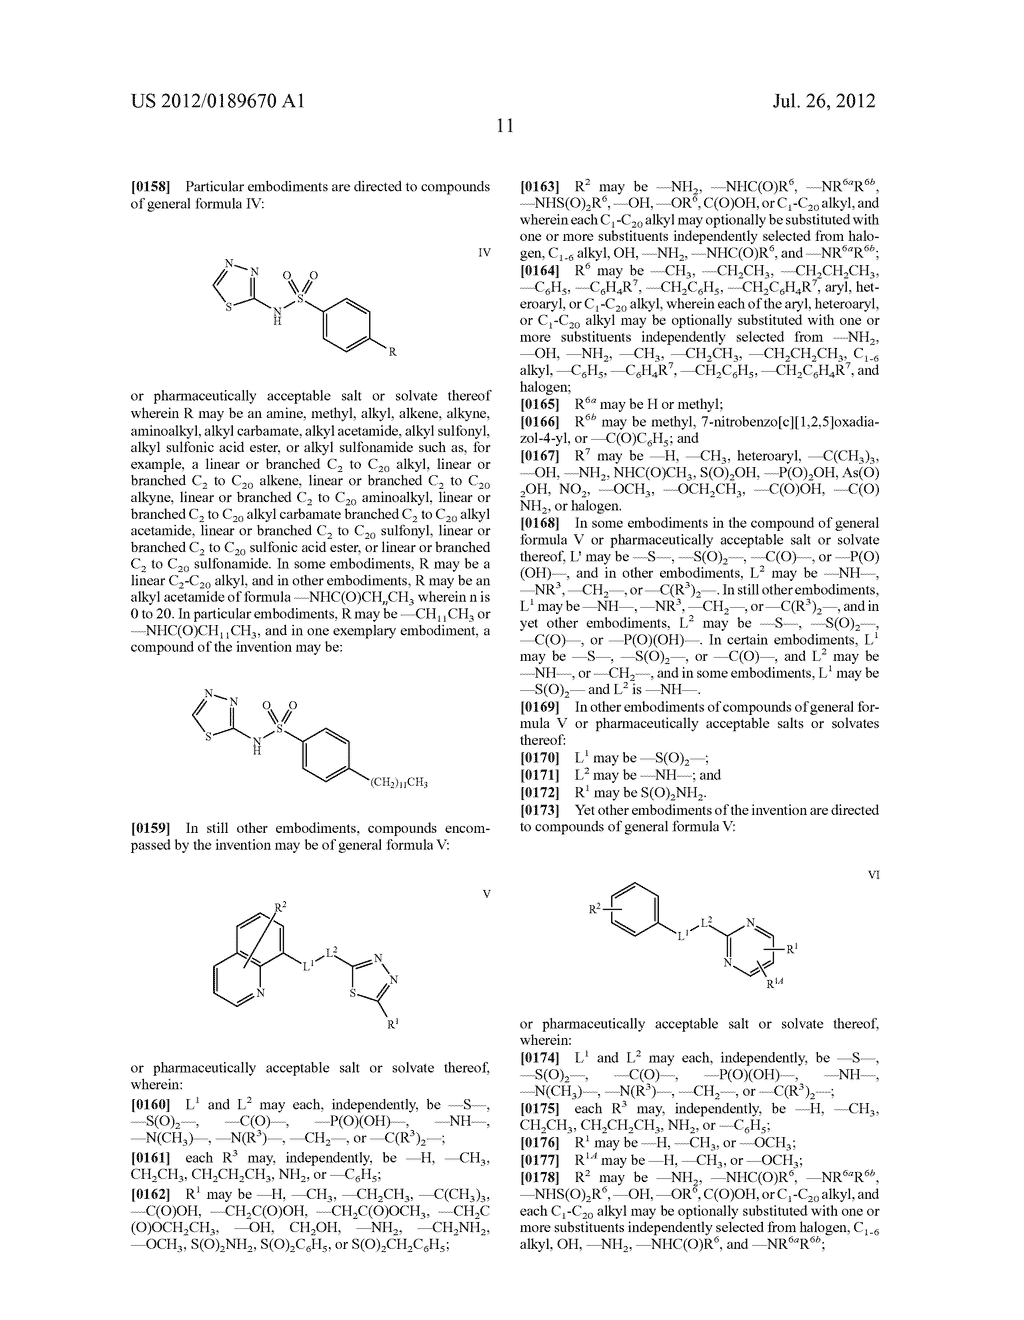 PHARMACEUTICAL COMPOSITIONS AND FORMULATIONS INCLUDING INHIBITORS OF THE     PLECKSTRIN HOMOLOGY DOMAIN AND METHODS FOR USING SAME - diagram, schematic, and image 45